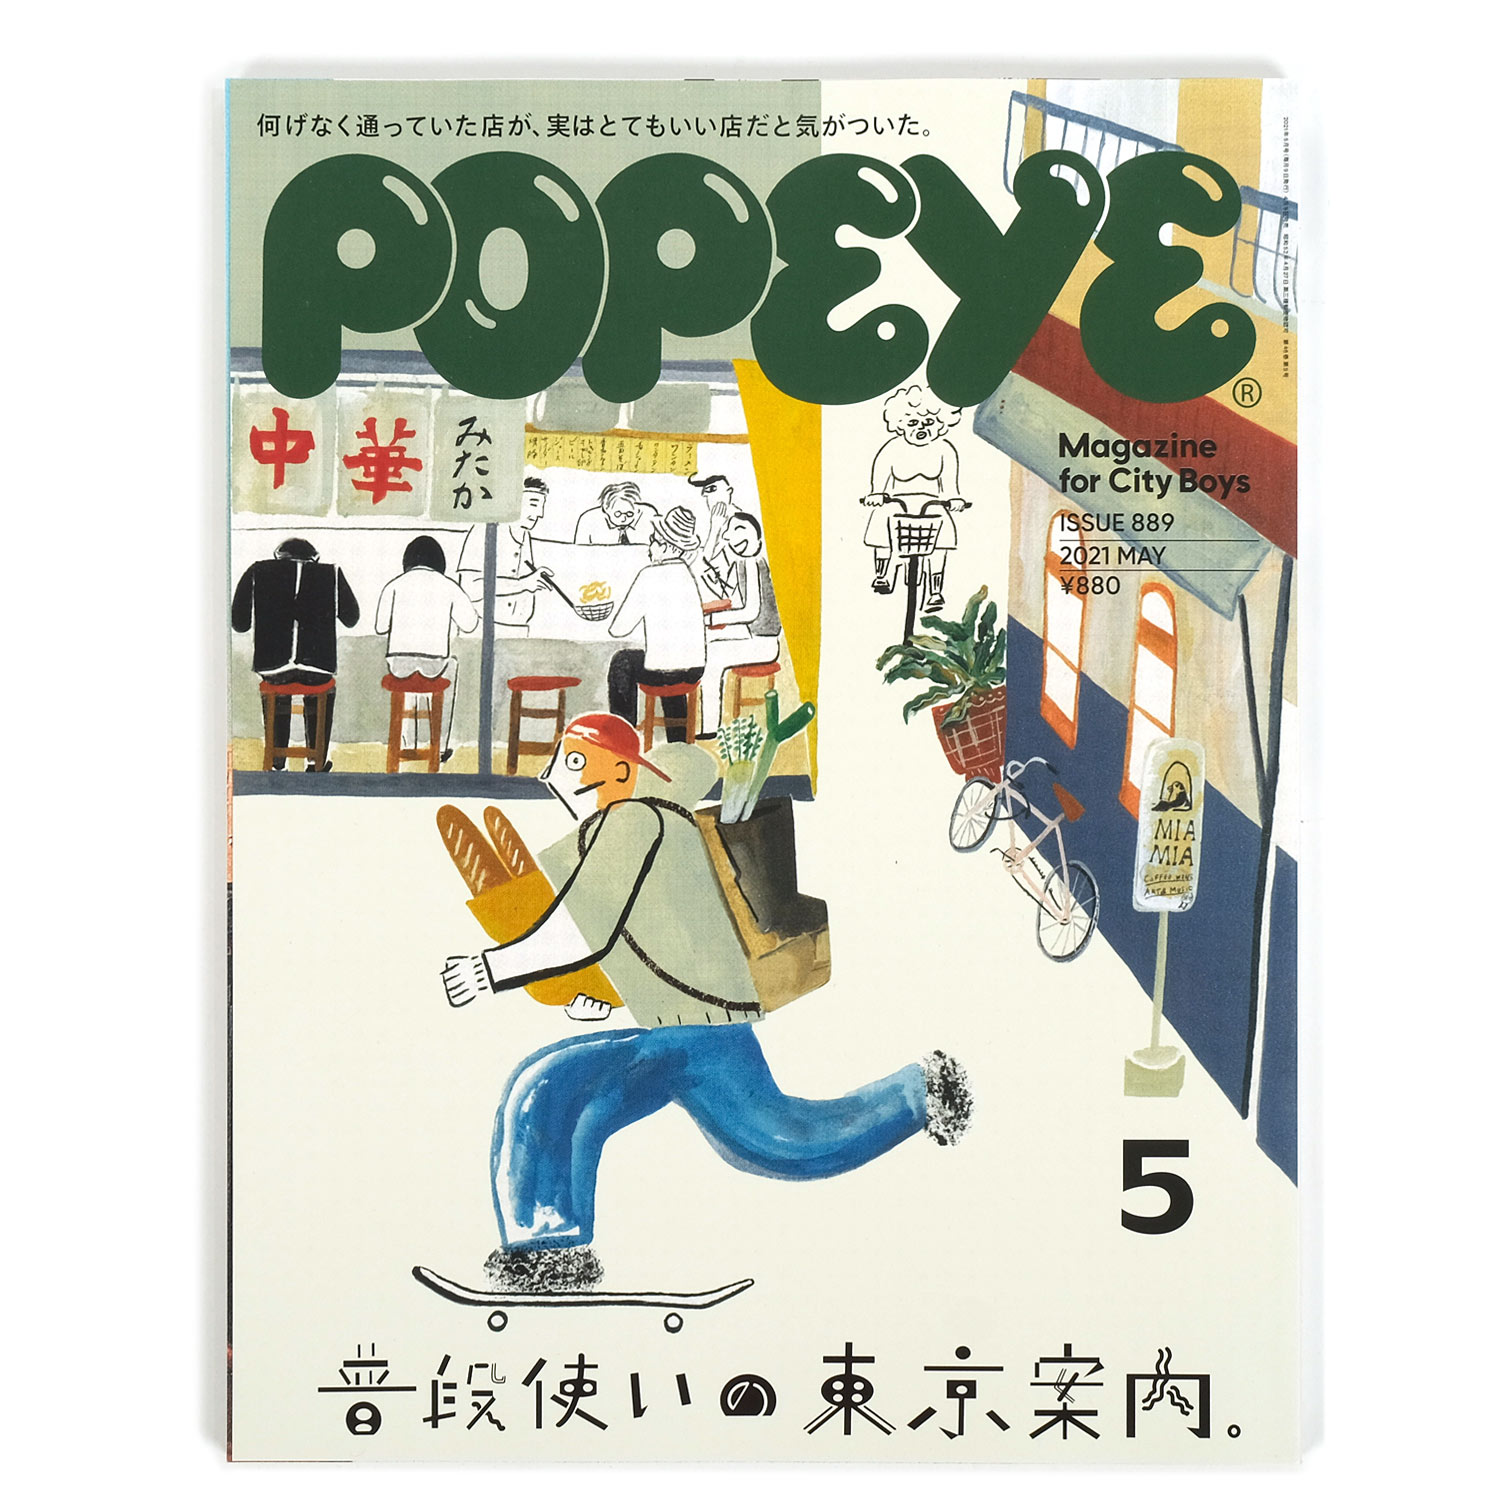 Popeye #889 Tokyo Guide for Everyday Life | FIRMAMENT - Berlin 